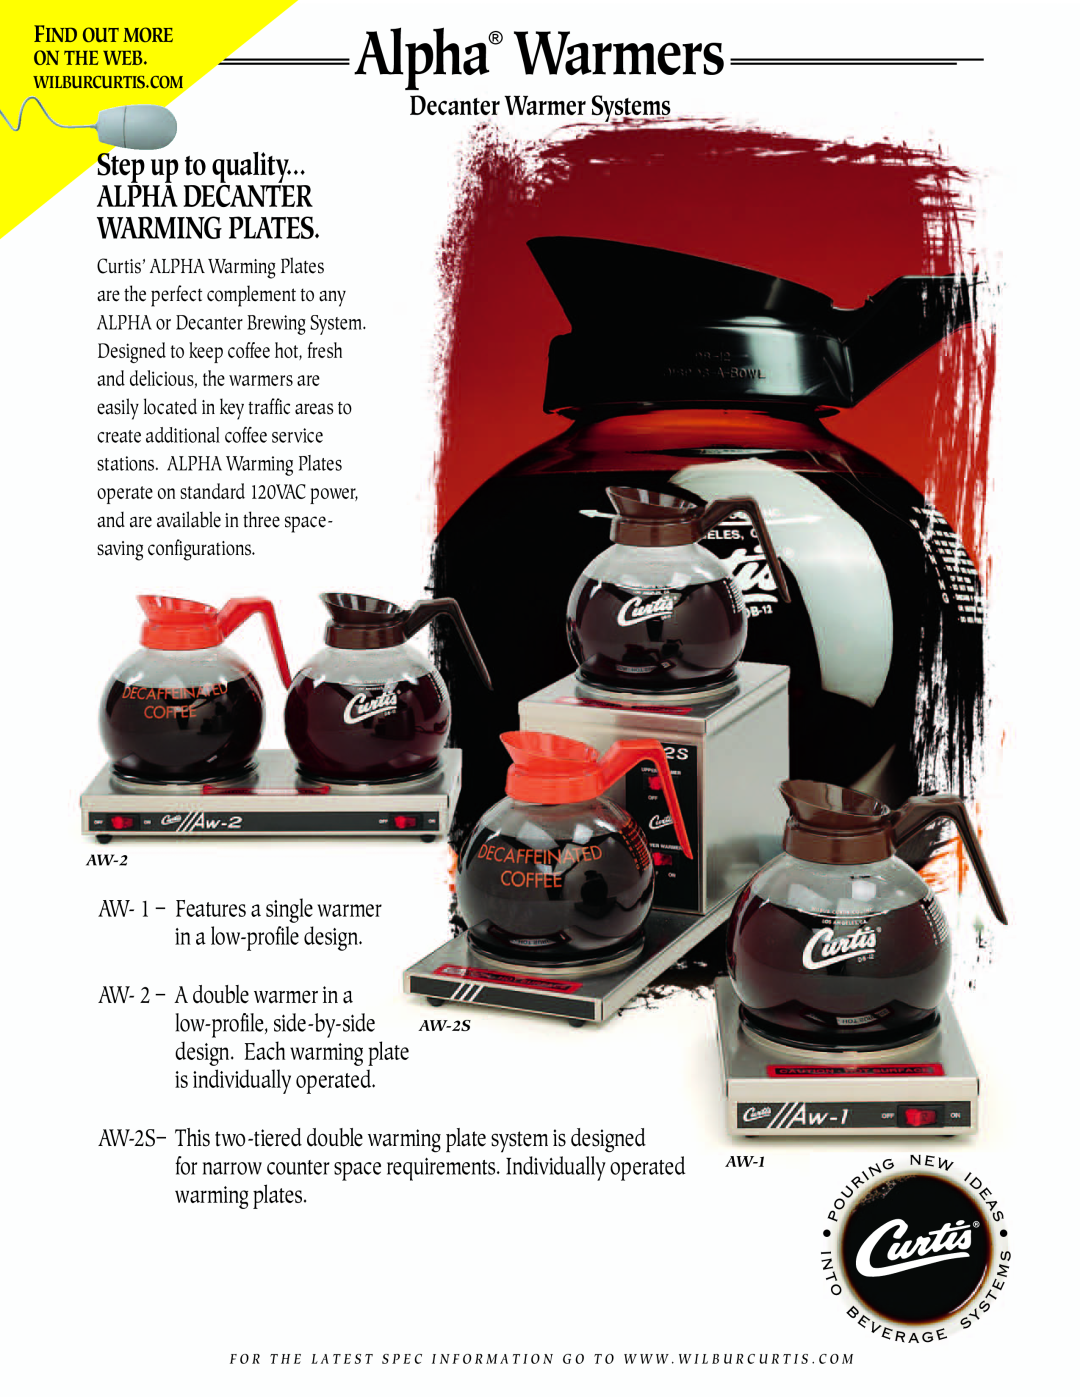 Curtis AW- 2 manual Decanter Warmer Systems, Find Out More, Alpha Warmers, Features a single warmer, A double warmer in a 